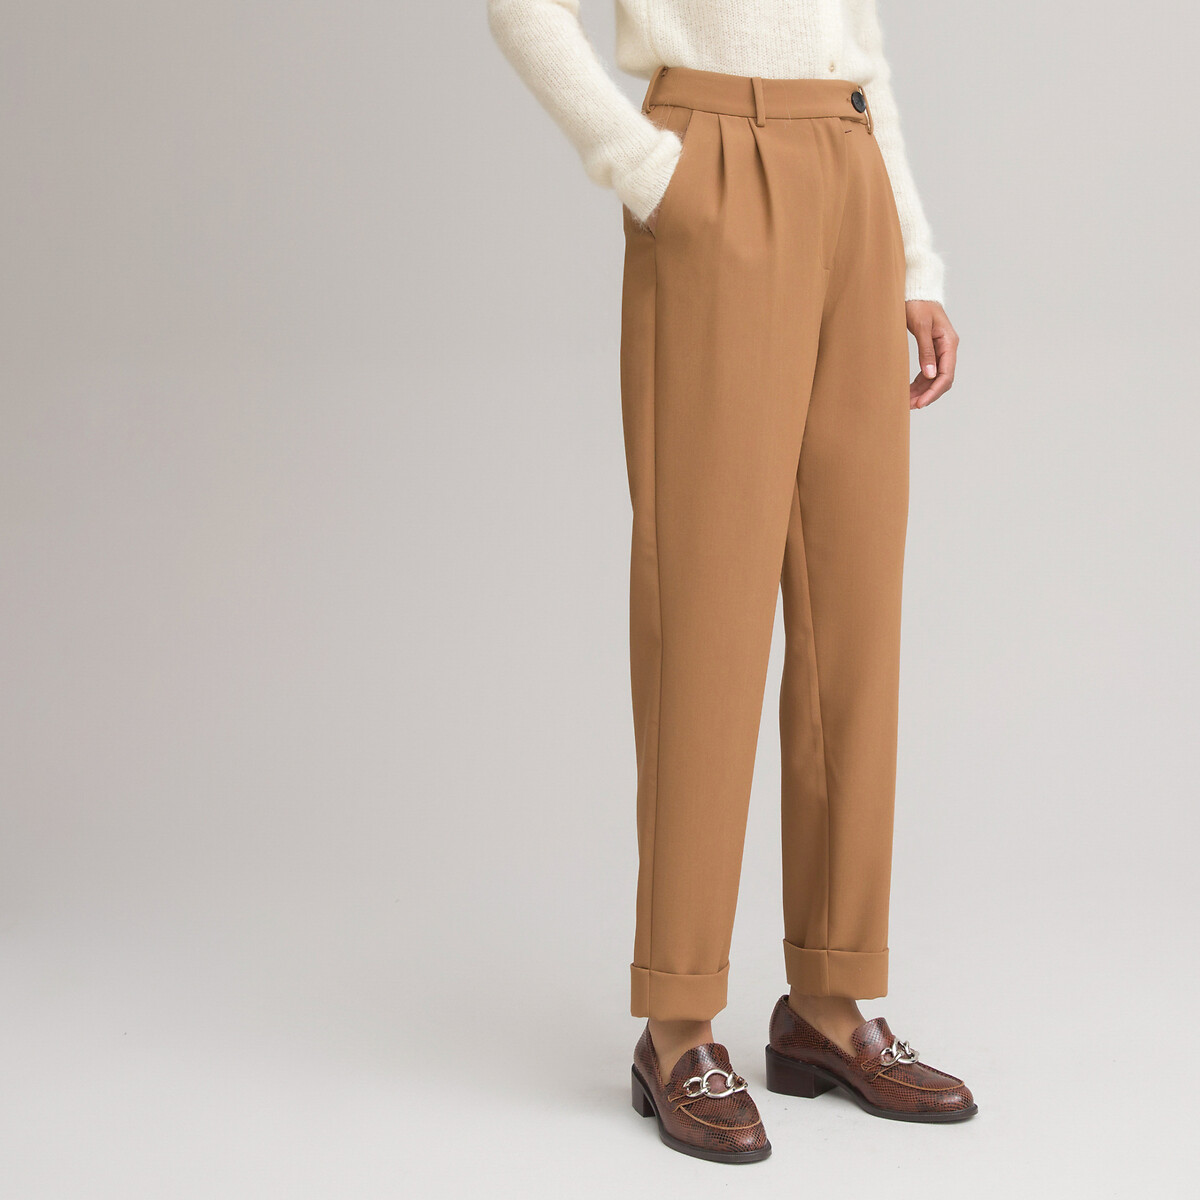 Recycled pleat front trousers with high waist, length 26